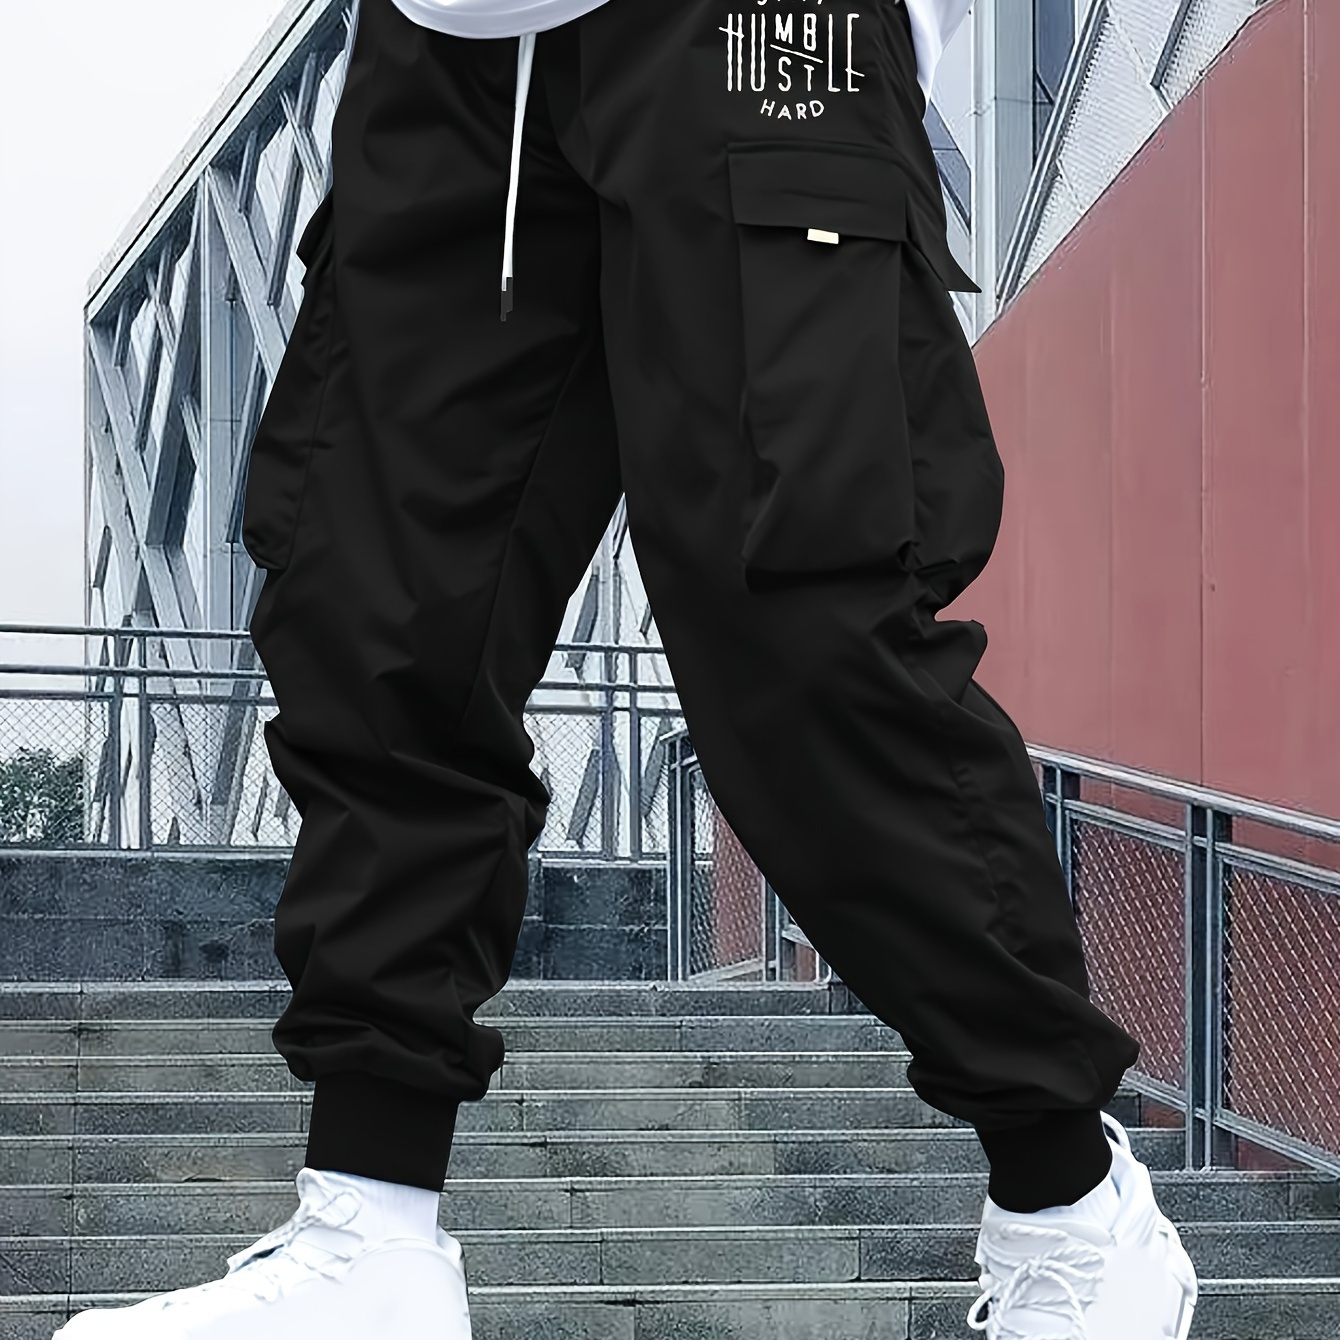 

Men's Letter Print Regular Fit And Cuffed Cargo Pants With Drawstring And Flap Pockets, Versatile And Casual Pants Suitable For Spring And Summer Outdoors And Jogging Wear